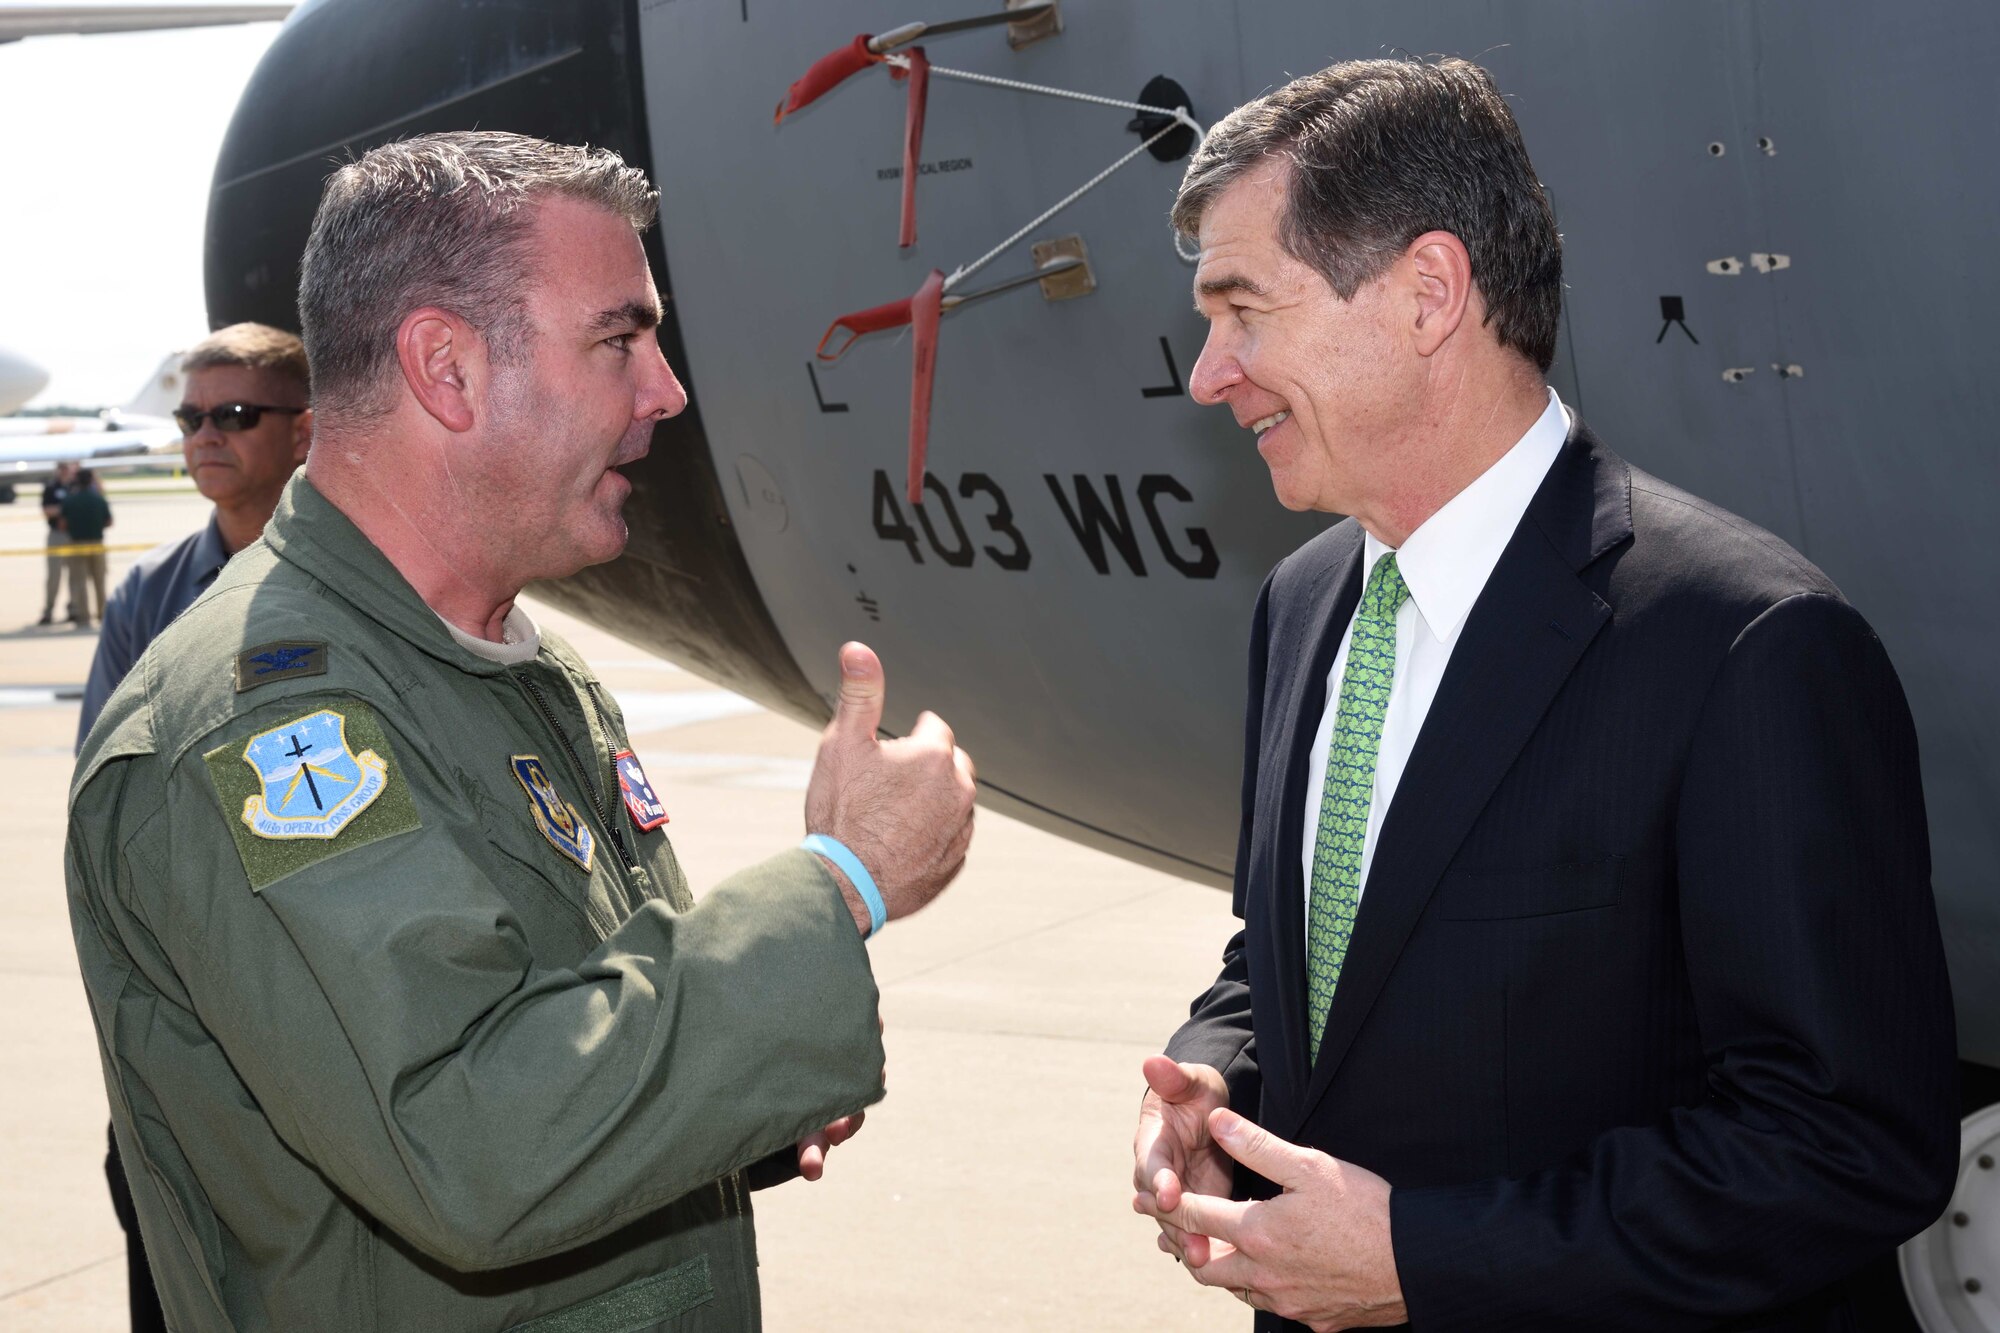 Col. Brian May, 403rd Wing Operations Group commander, talks with North Carolina Governor Roy Cooper about the mission of the 53rd Weather Reconnaissance Squadron “Hurricane Hunters” in Raleigh, North Carolina, during the 2017 Hurricane Awareness Tour May 10, 2017. The purpose of the tour, which ran from May 6-12, 2017, was to focus attention on the approaching hurricane season and on protecting communities through preparedness and awareness. (U.S. Air Force photo/Tech. Sgt. Ryan Labadens)